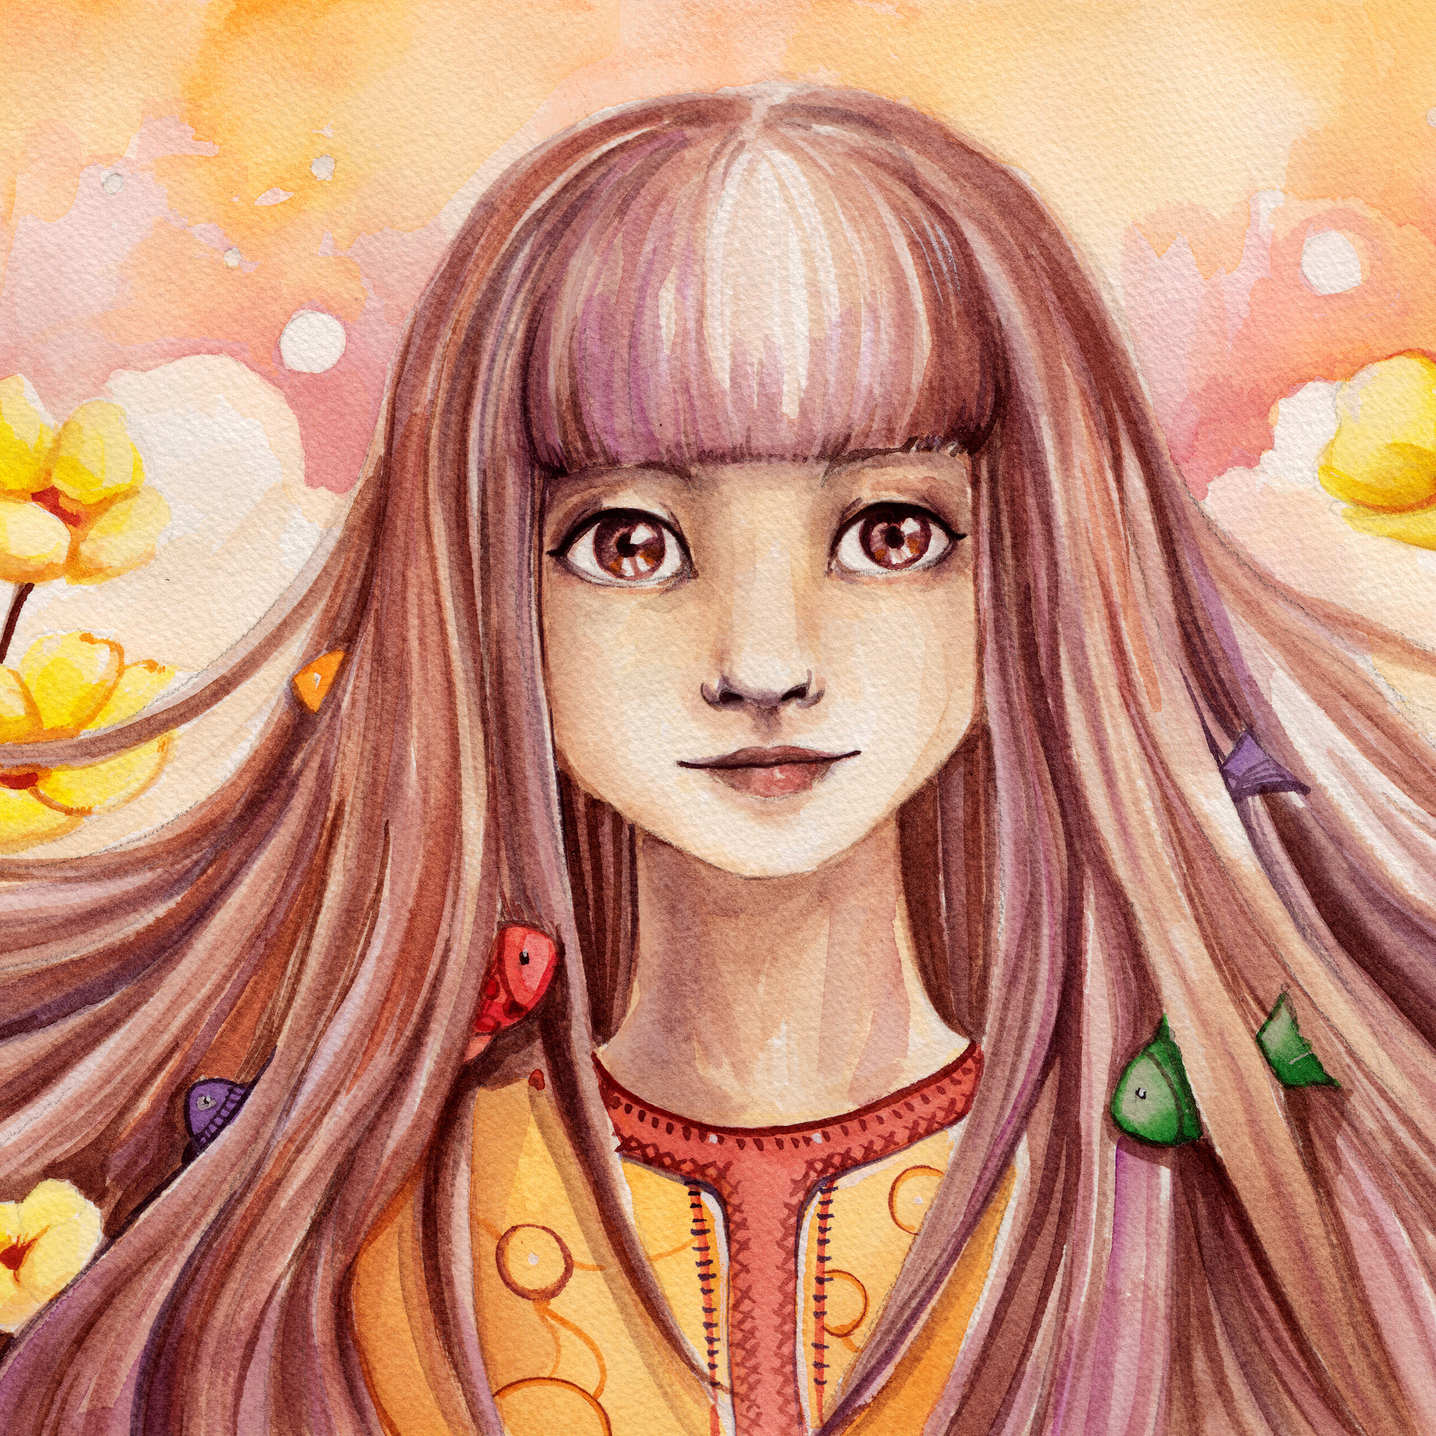 drawing of a girl with long hair and surrounded by flowers